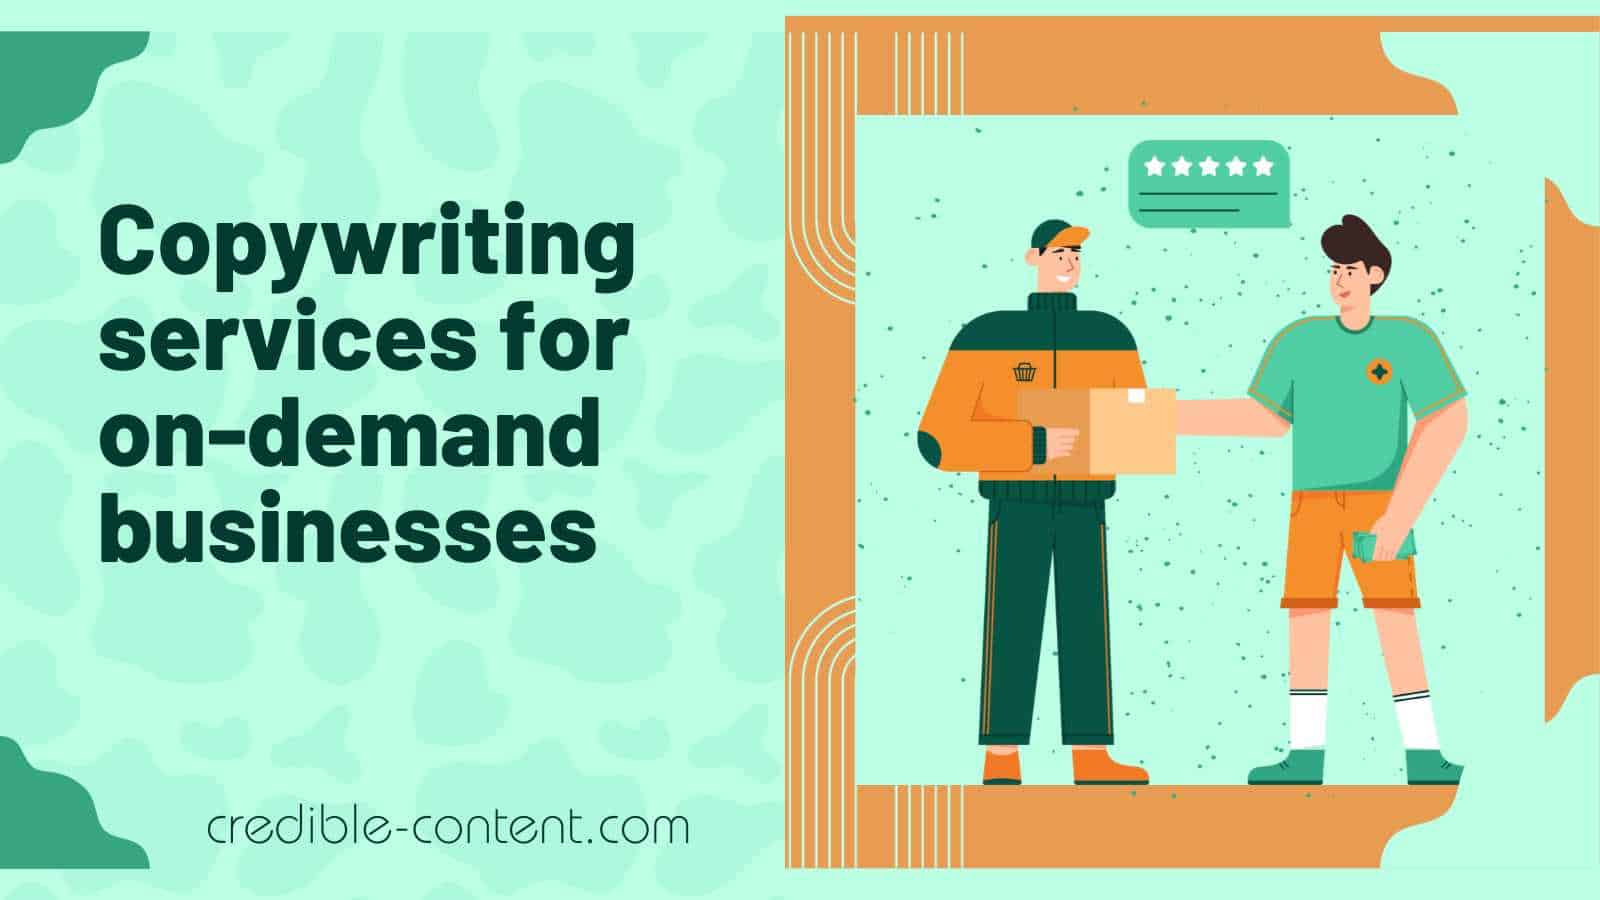 Copywriting services for on-demand businesses